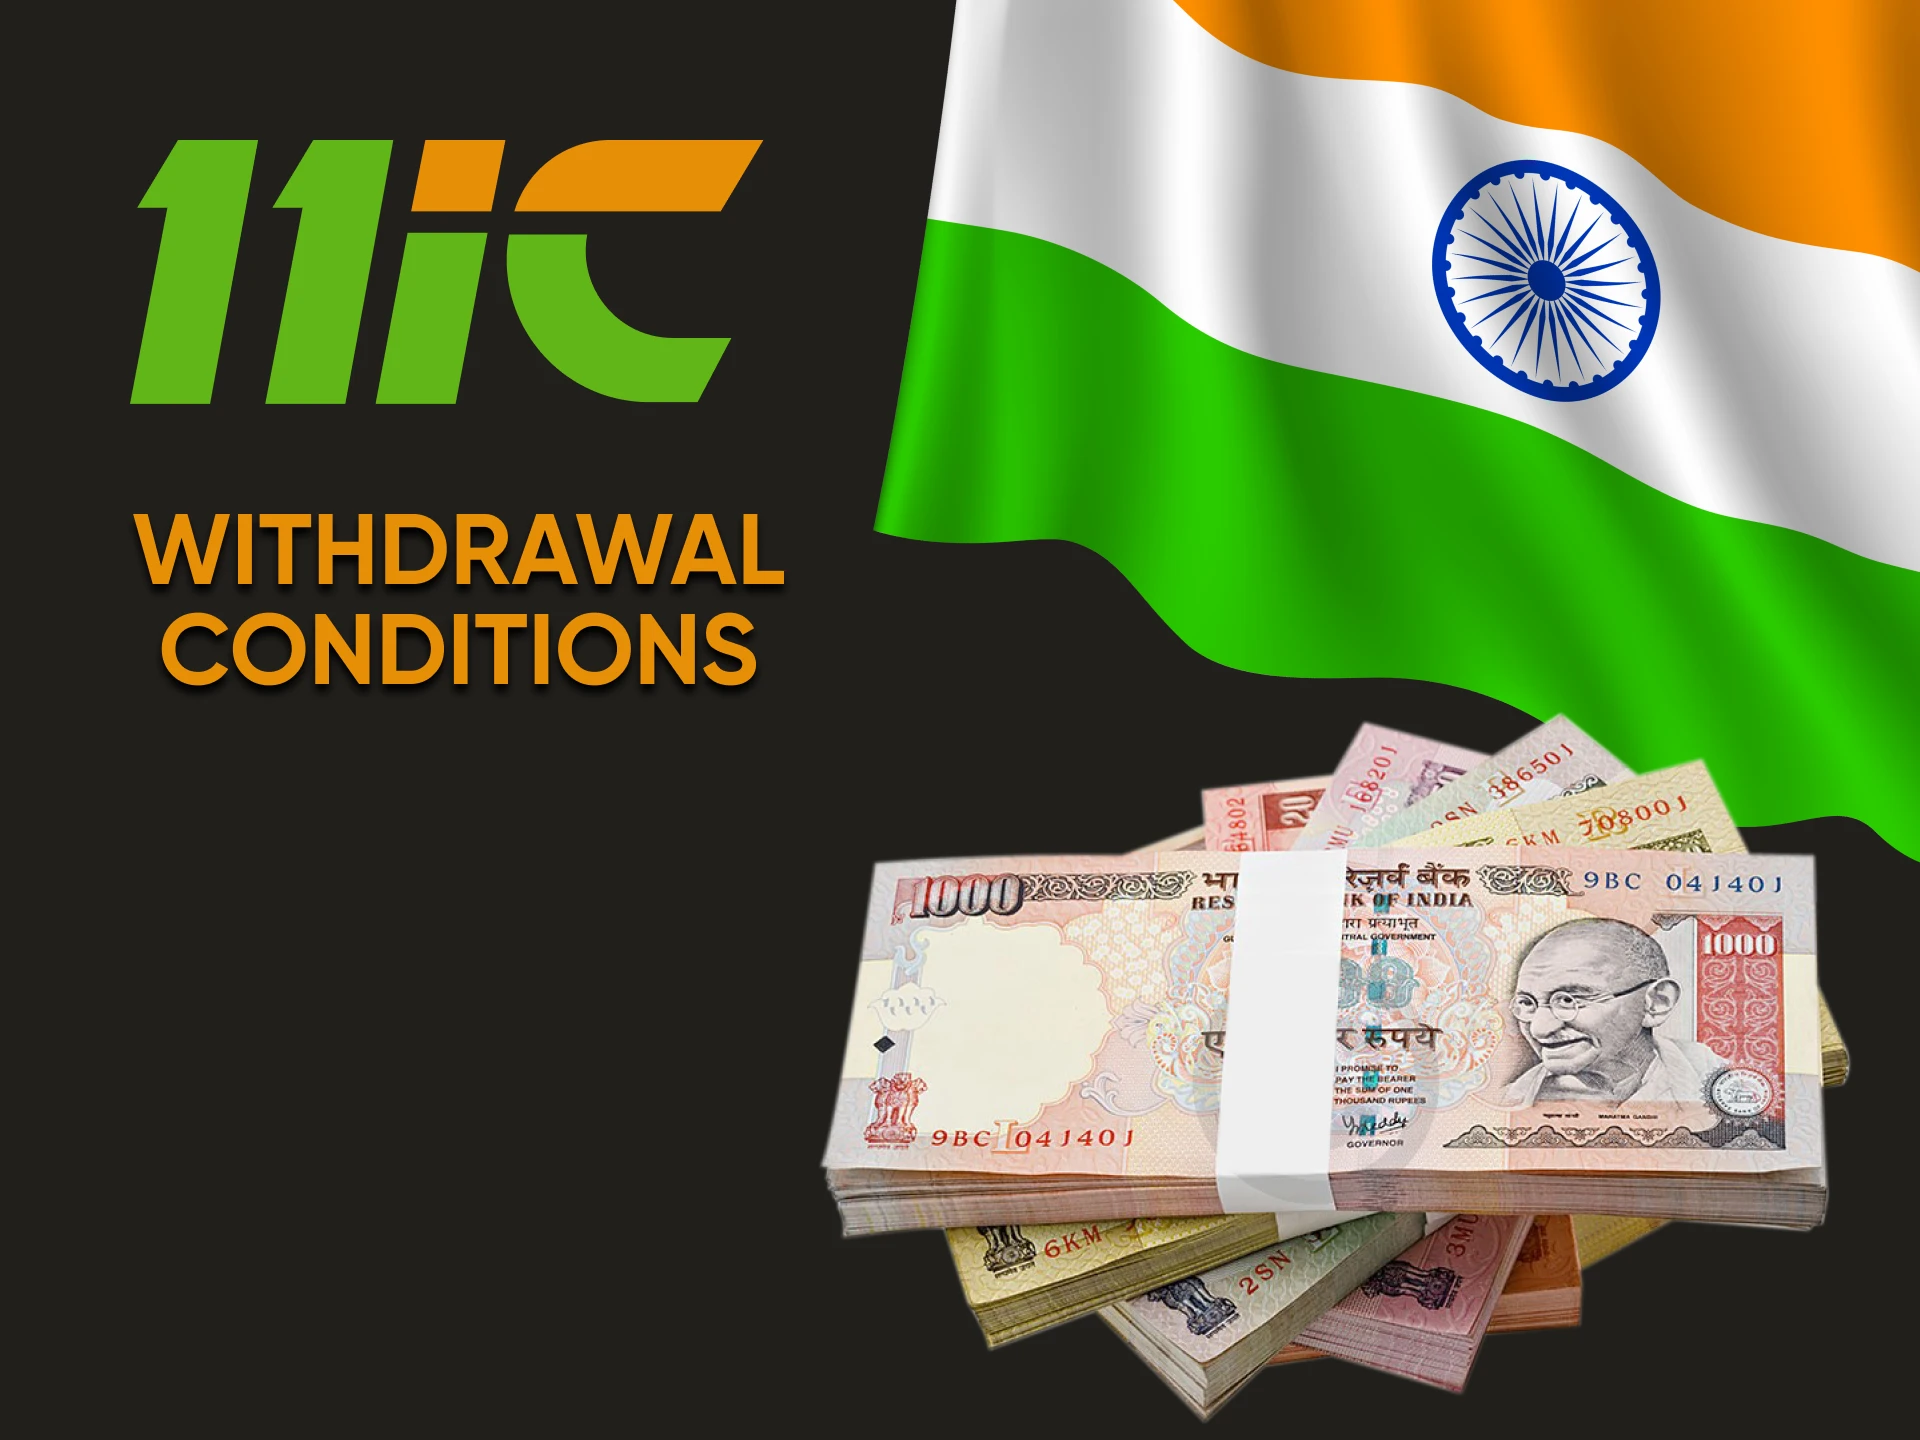 Study the withdrawal conditions on 11ic.